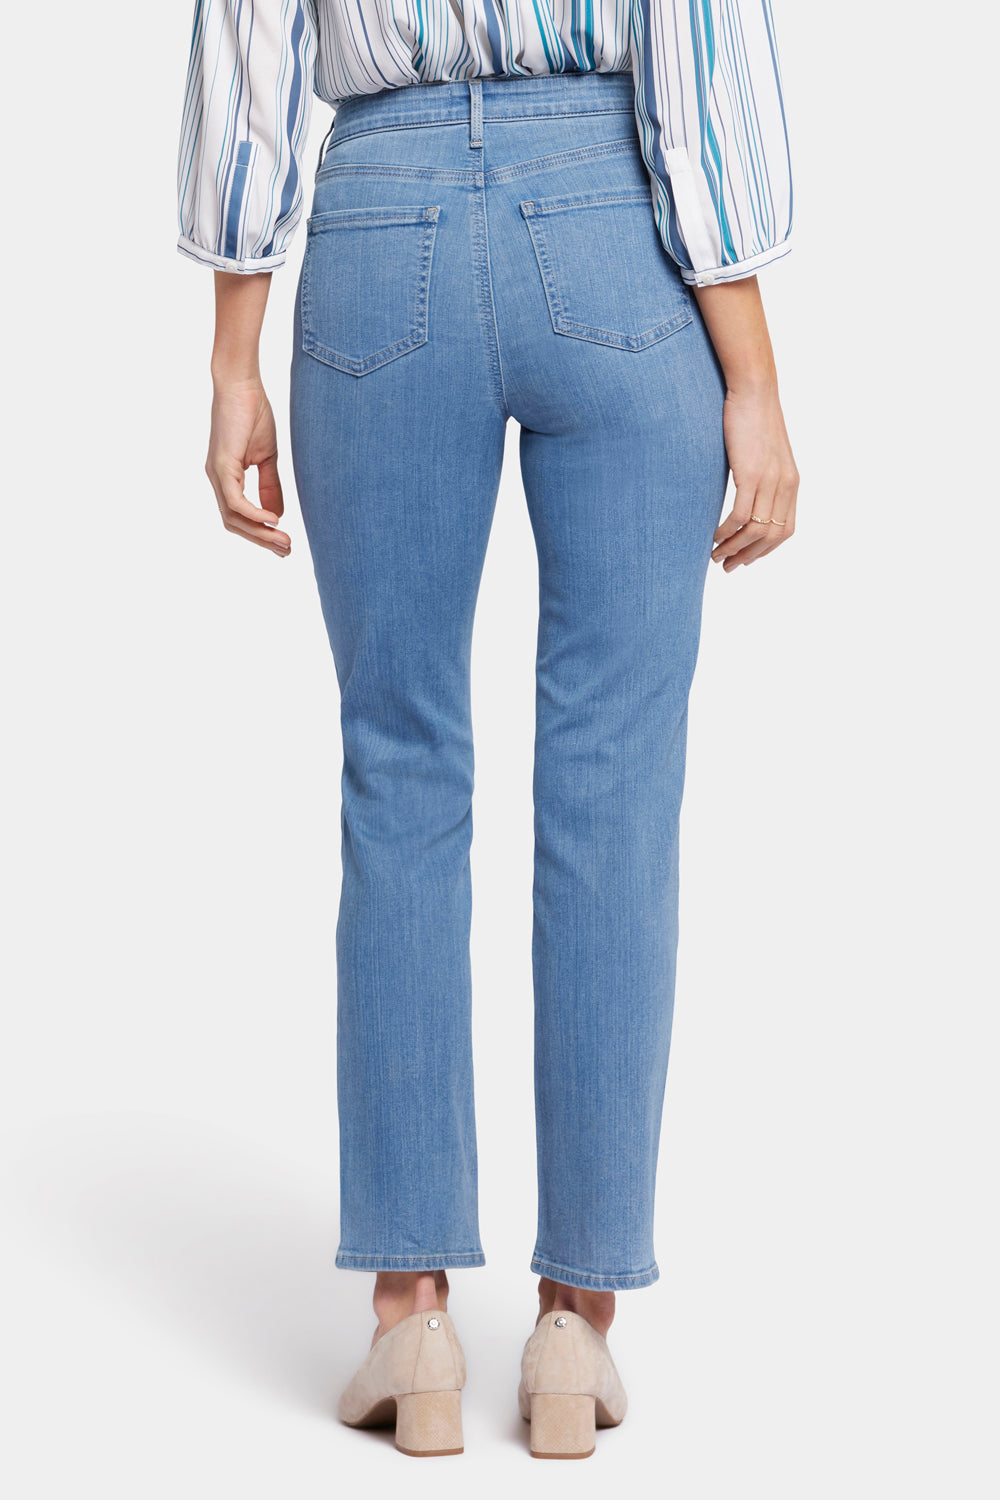 NYDJ Sheri Slim Jeans In Petite With High Rise - Nottinghill